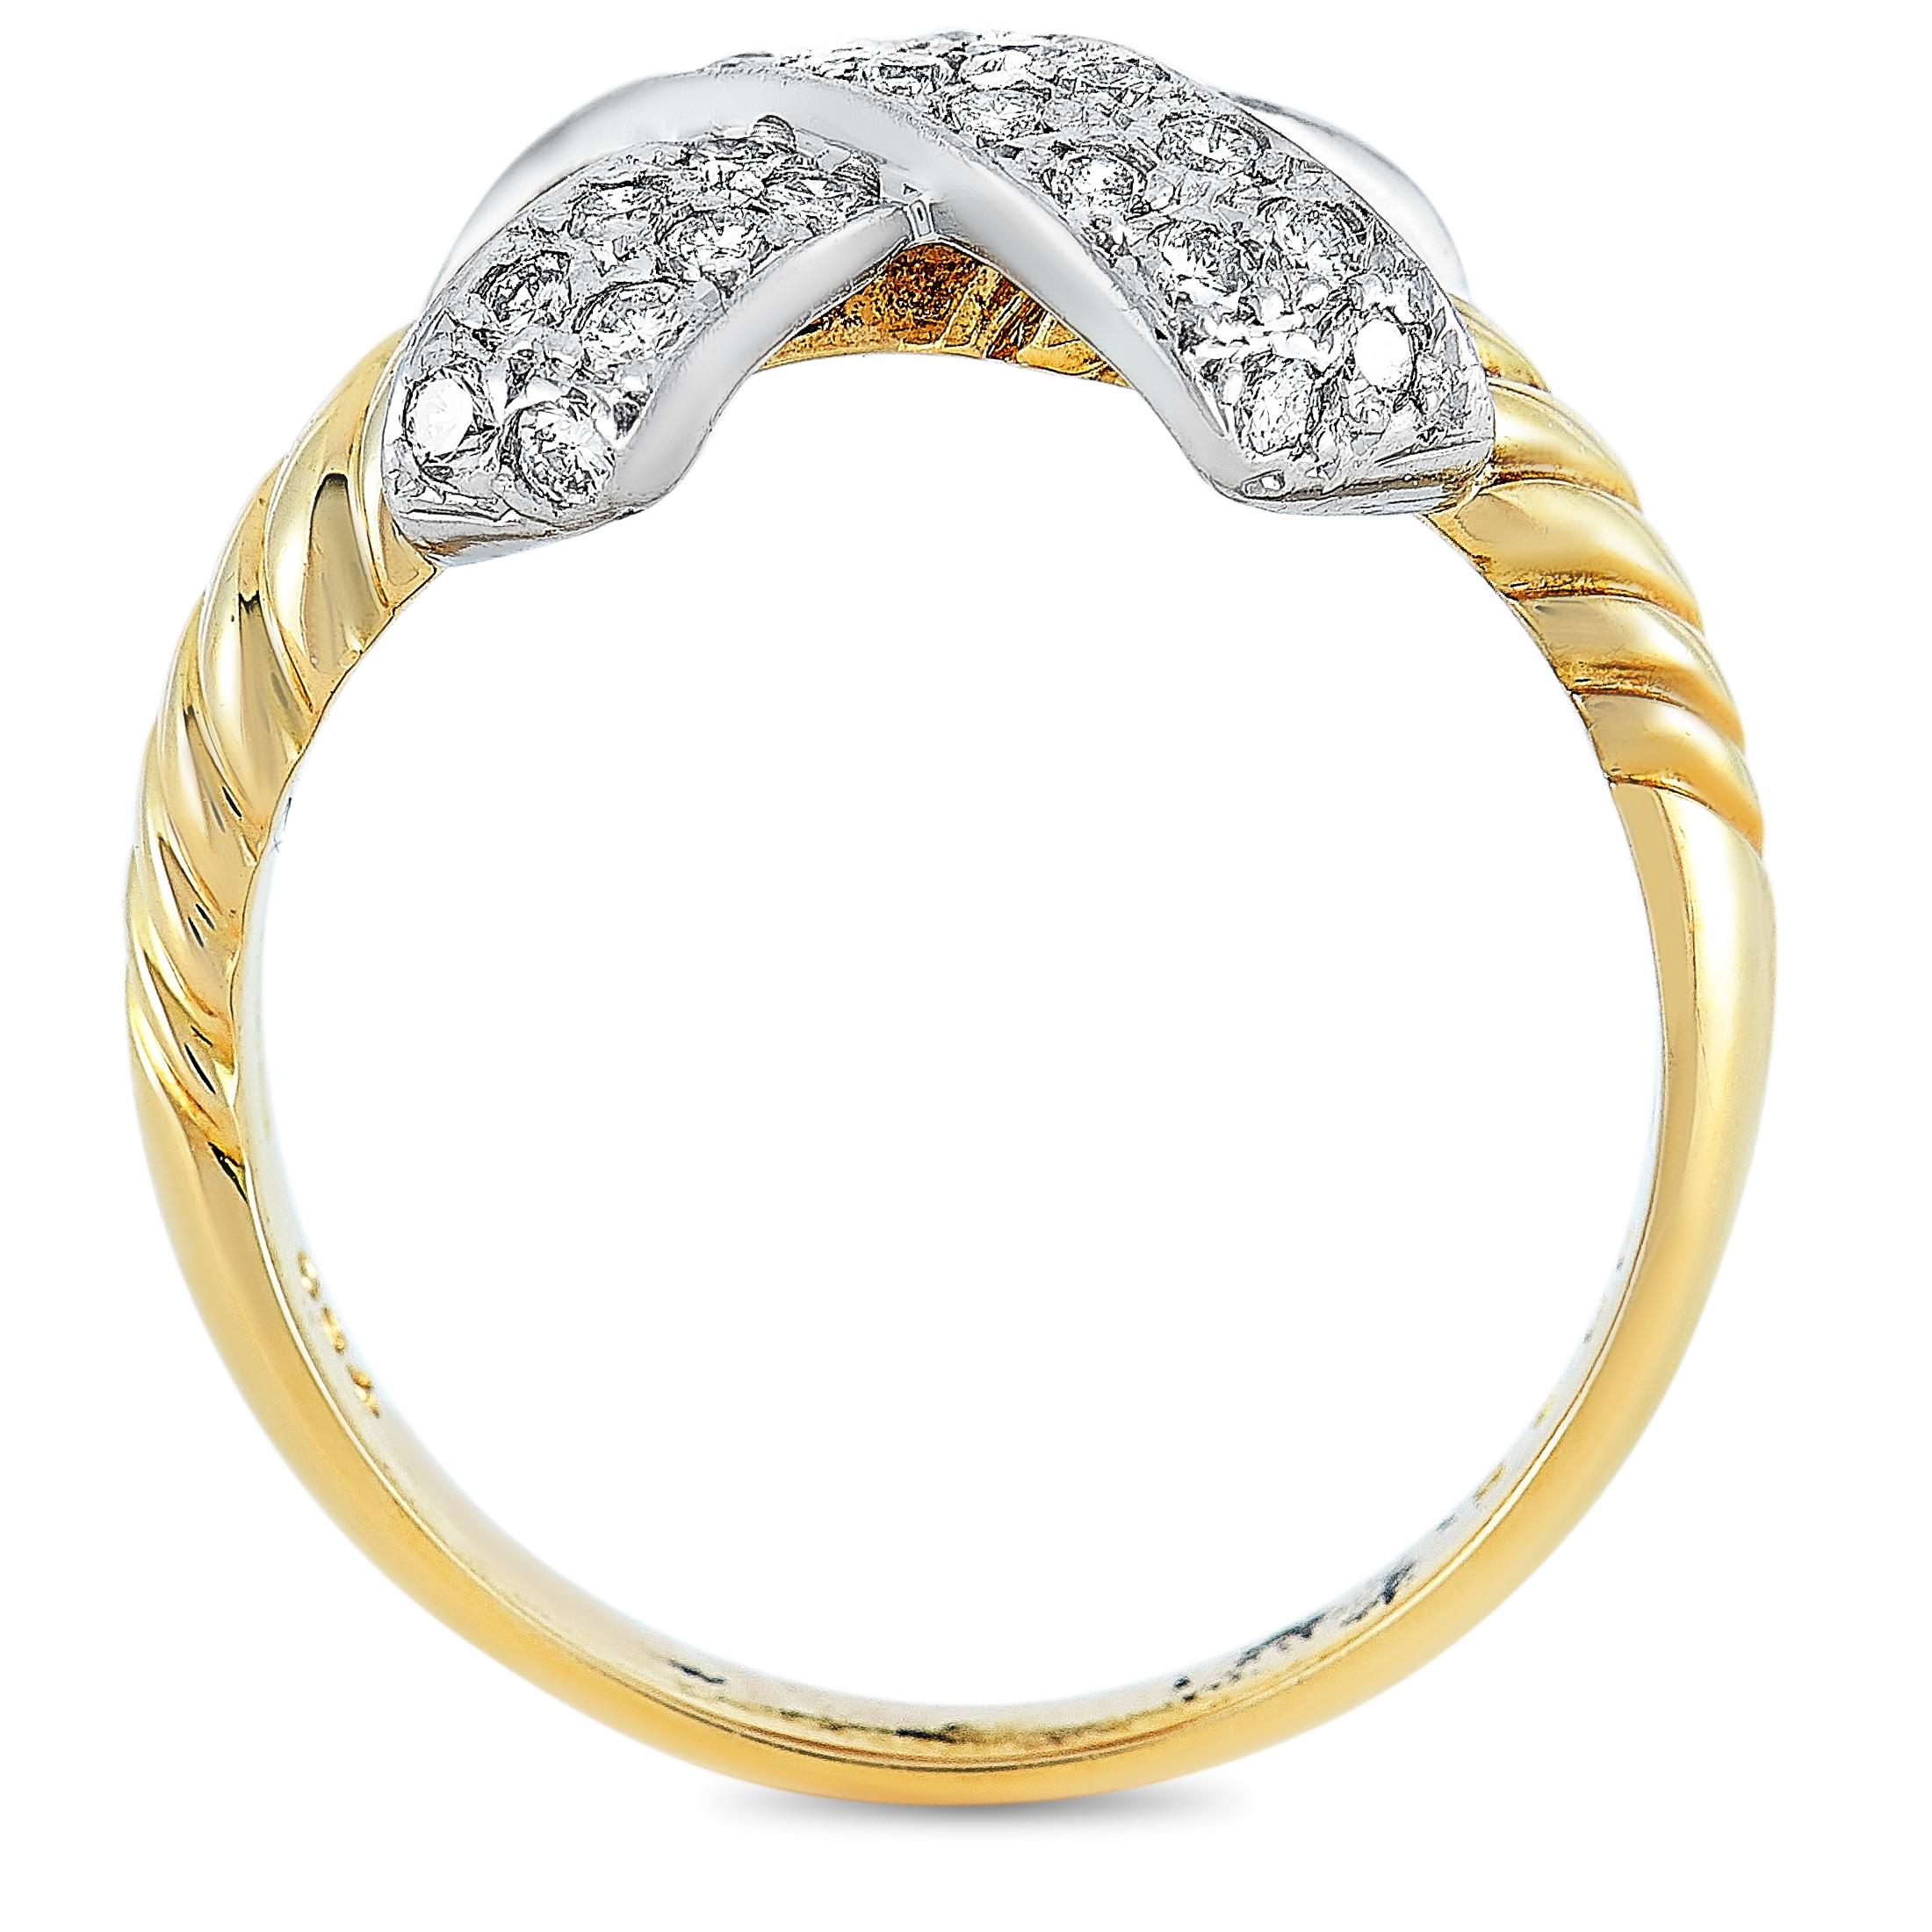 This Lanvin ring is made out of 18K yellow and white gold and embellished with diamonds that total 0.45 carats. The ring weighs 5.5 grams and boasts band thickness of 3 mm and top height of 3 mm, while top dimensions measure 12 by 10 mm.
 
 Offered